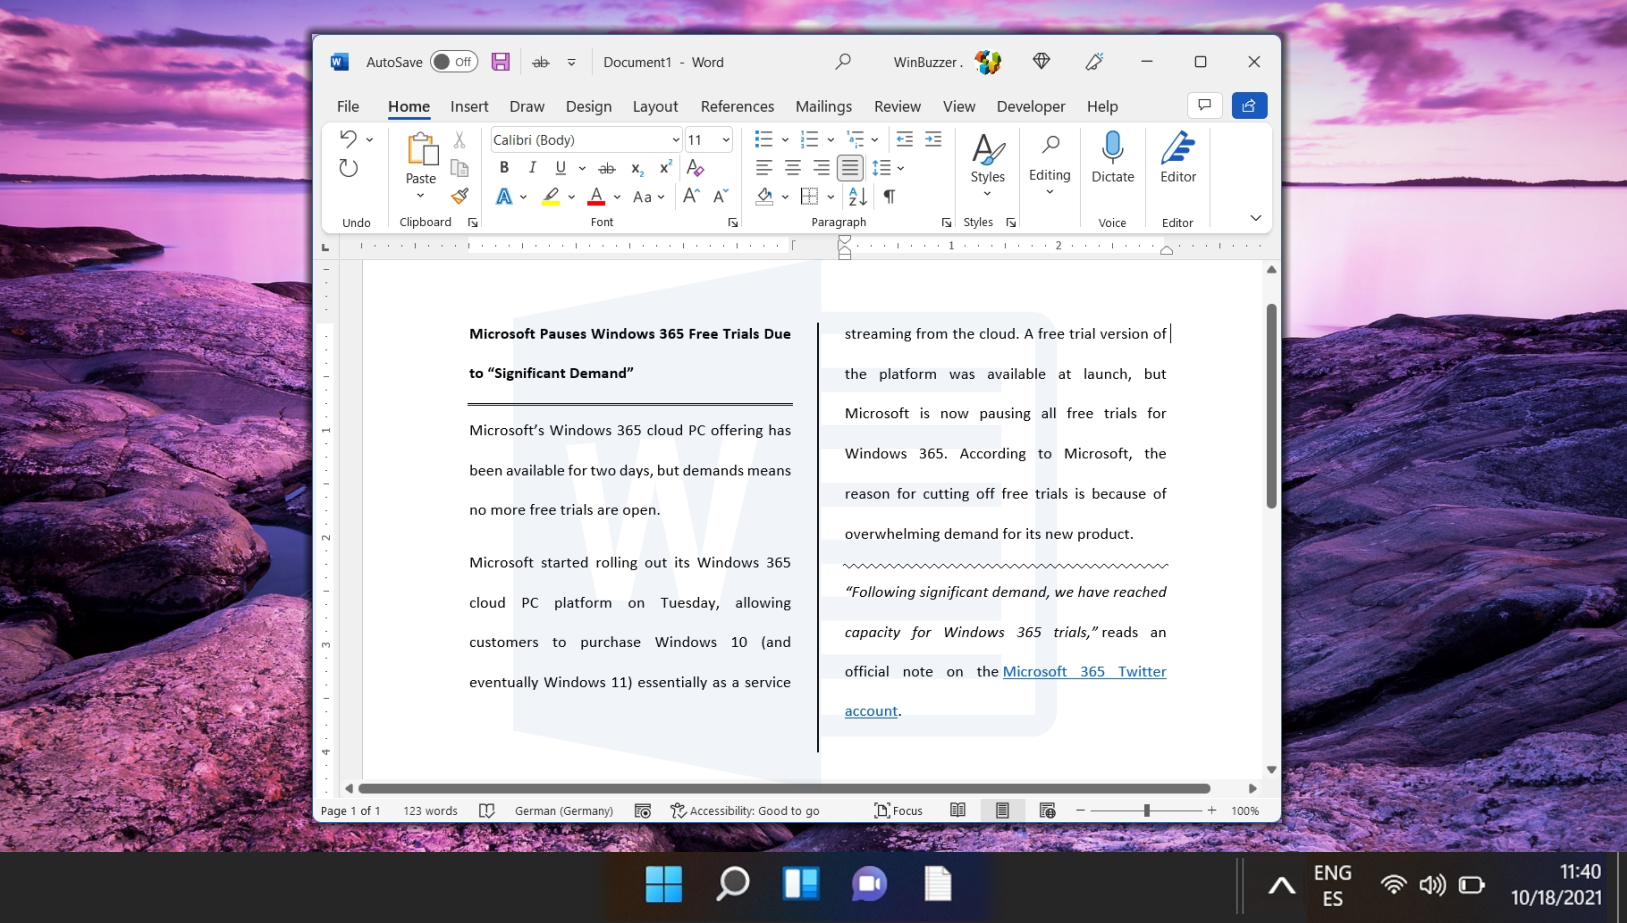 Featured - How to Insert a Horizontal or Vertical Line in Microsoft Word